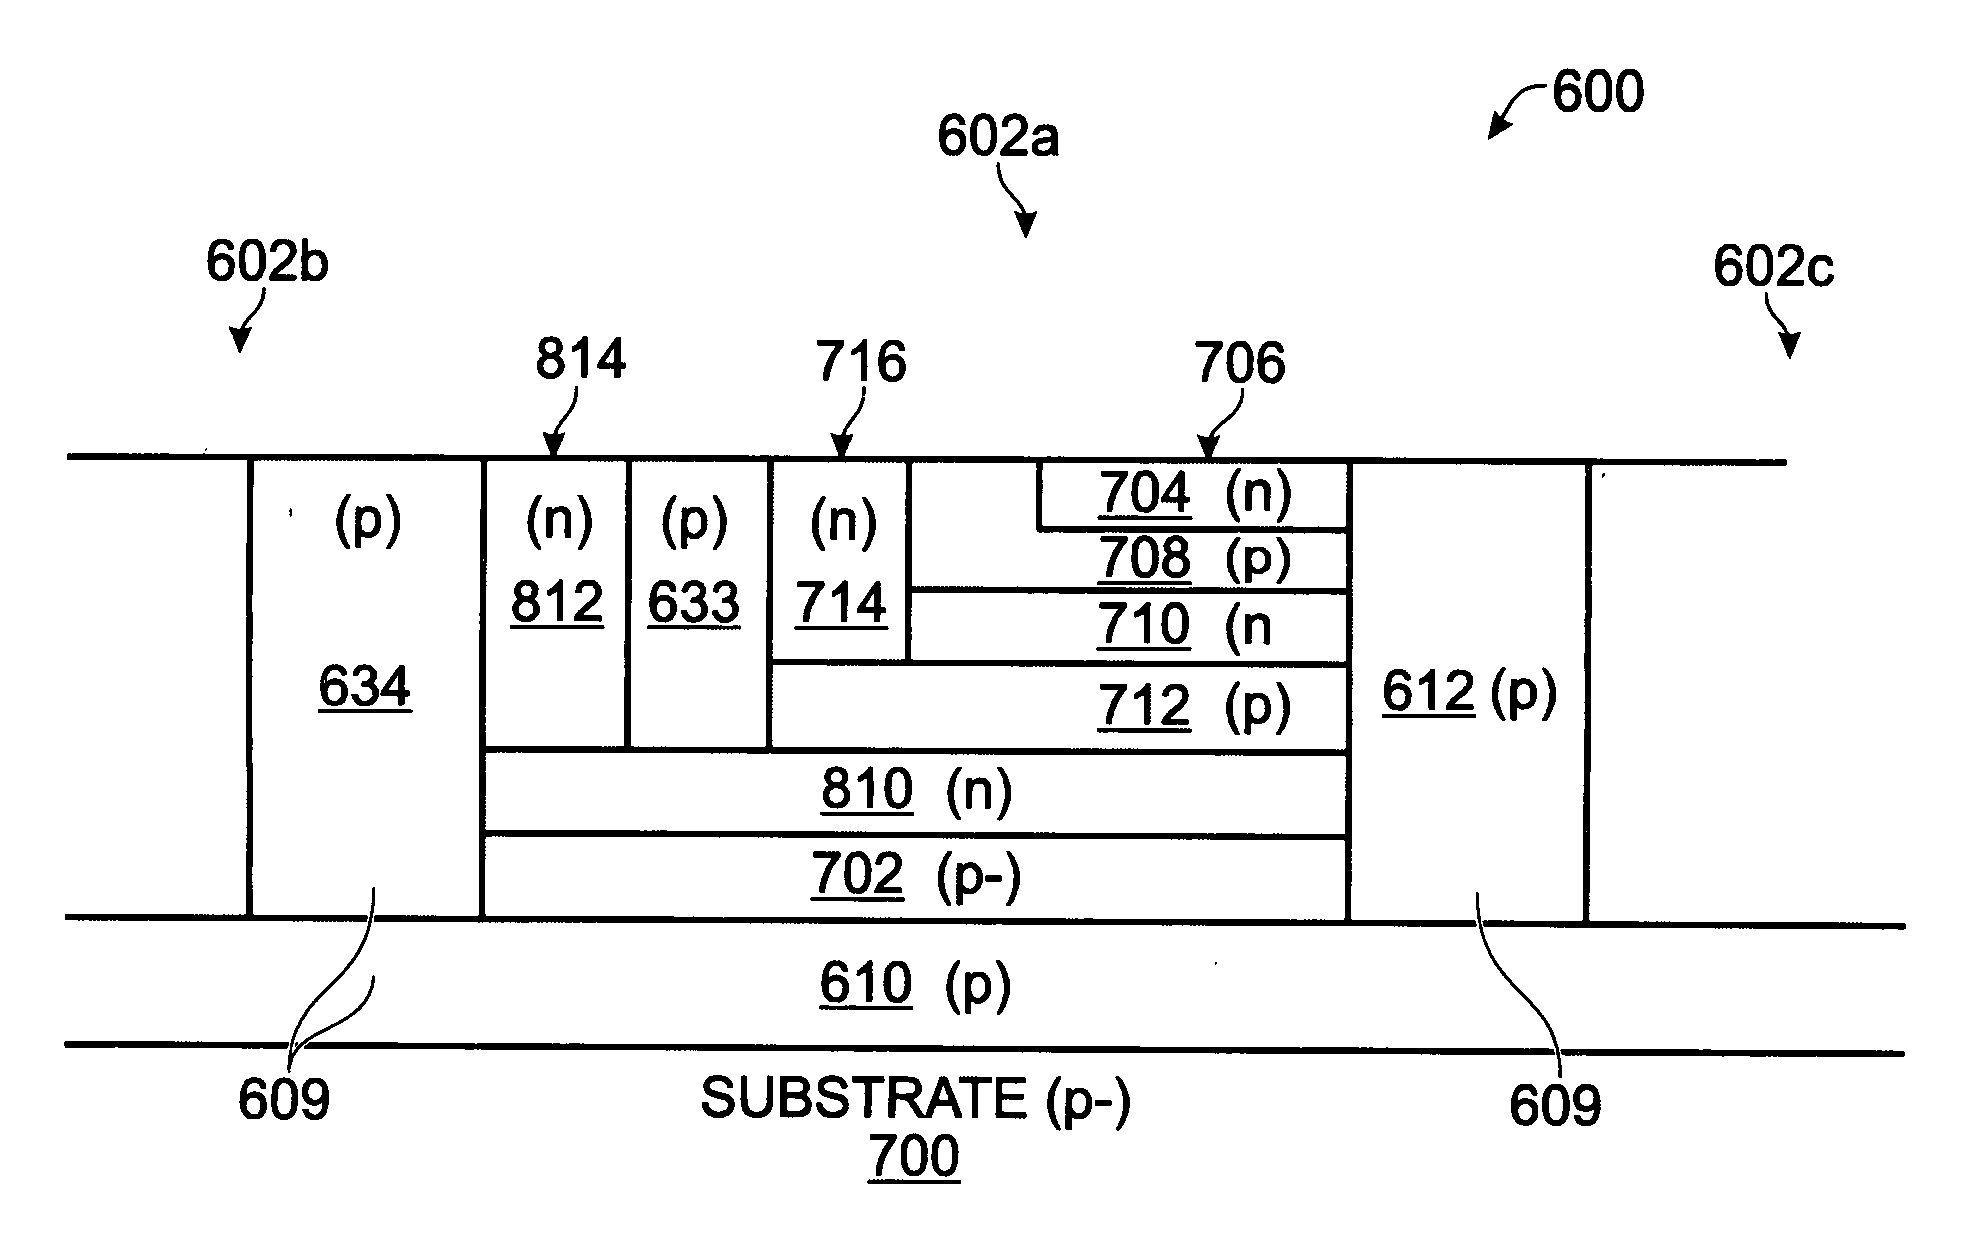 High energy implant photodiode stack